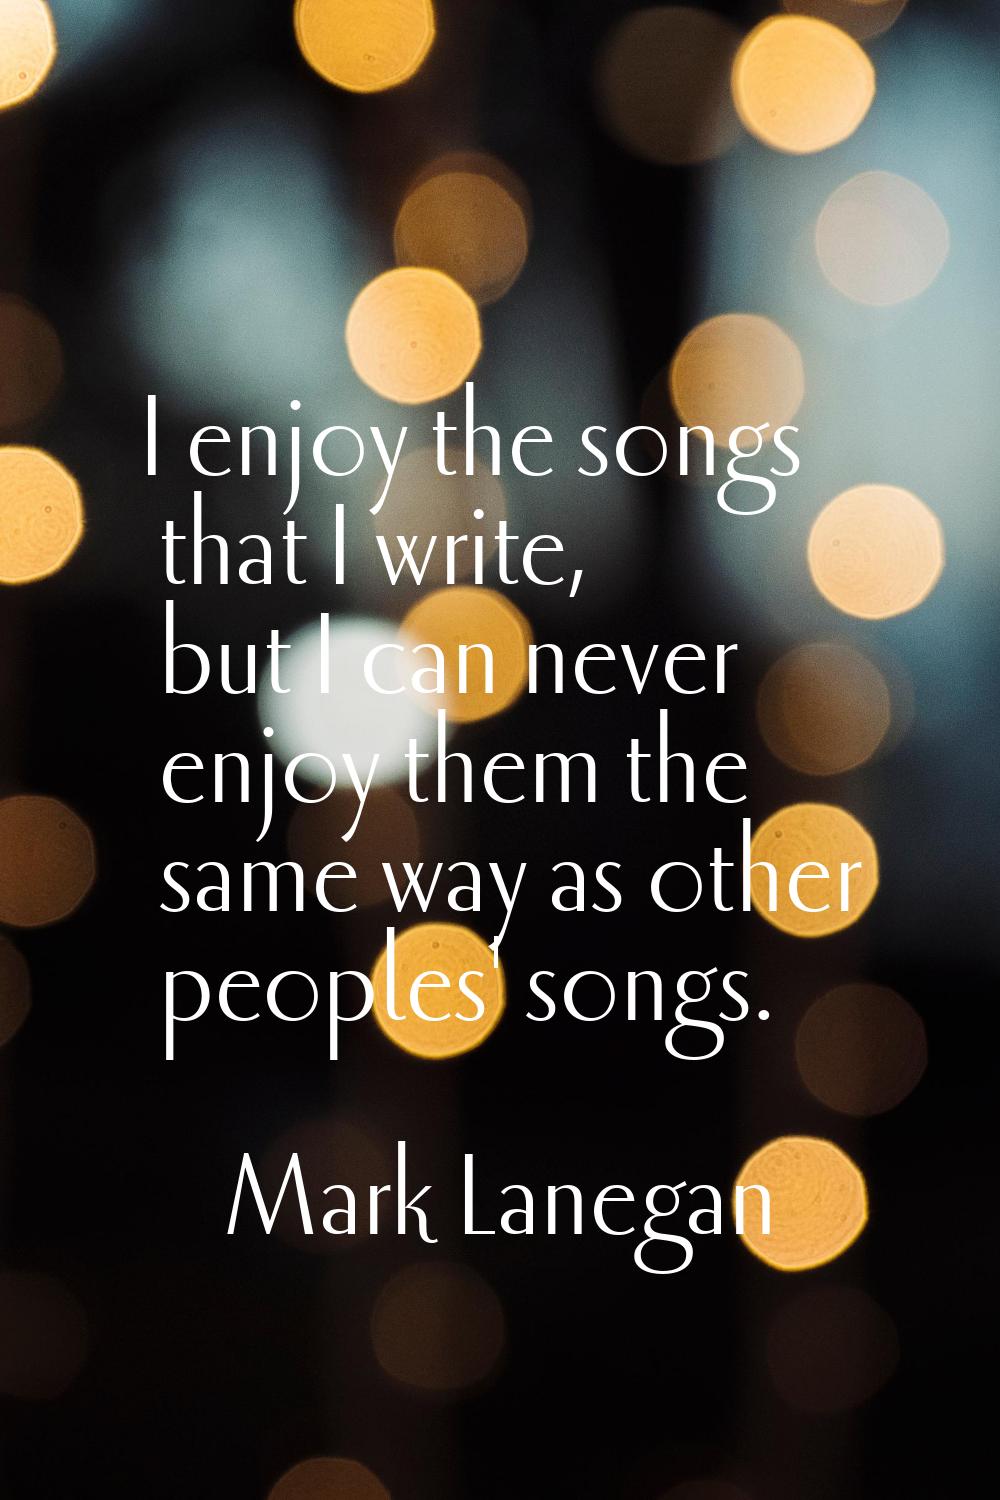 I enjoy the songs that I write, but I can never enjoy them the same way as other peoples' songs.